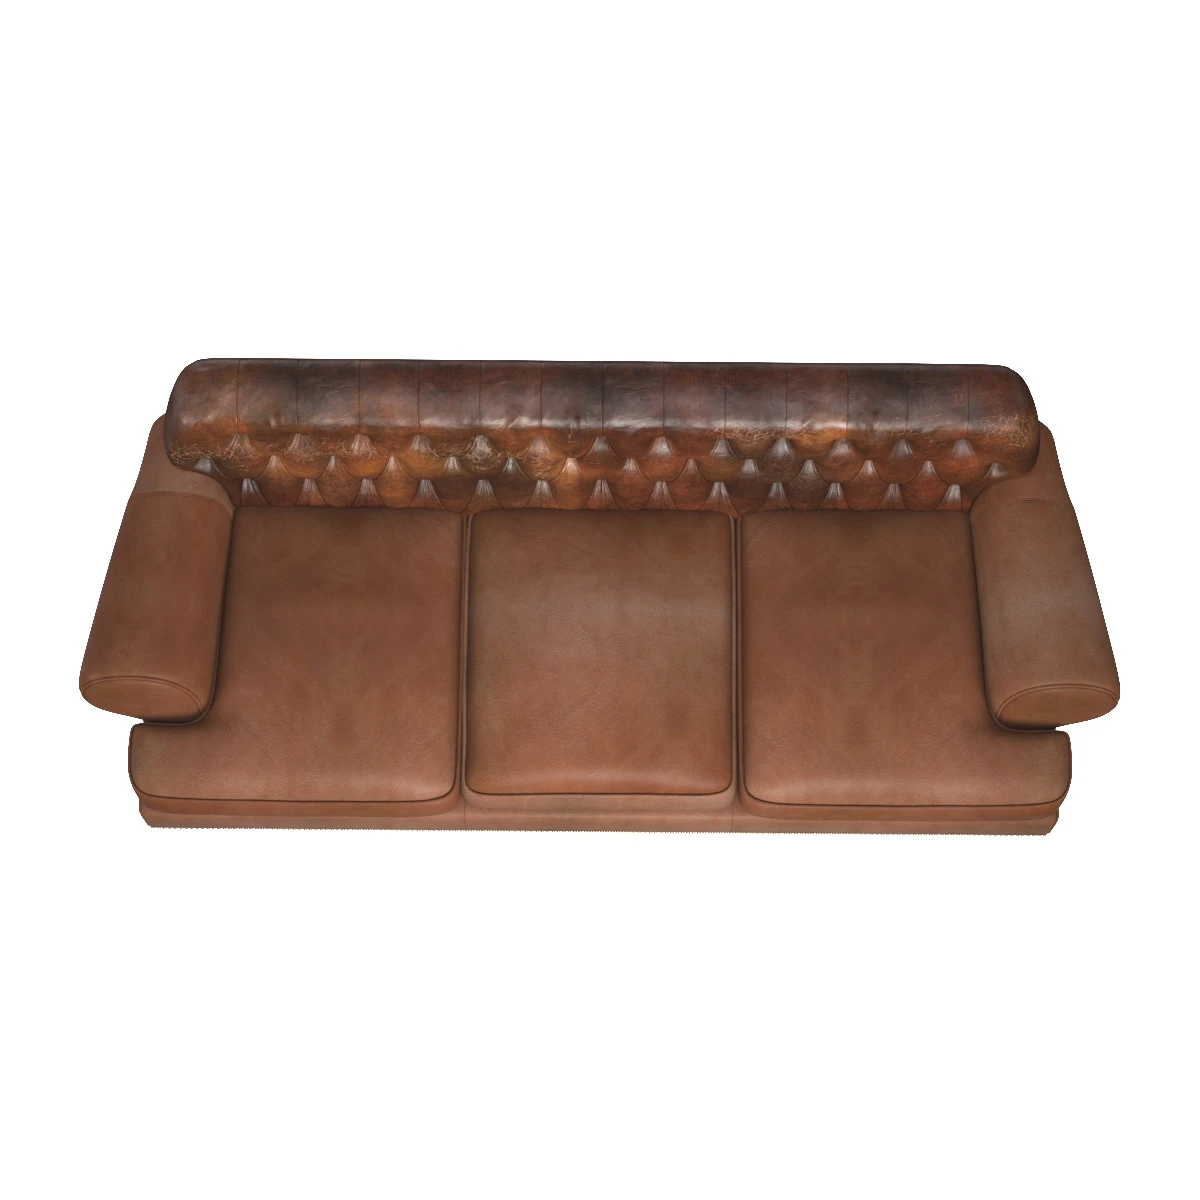 OHenry House Ltd Tufted Brown Leather Three Seat Sofa 3D Model_03